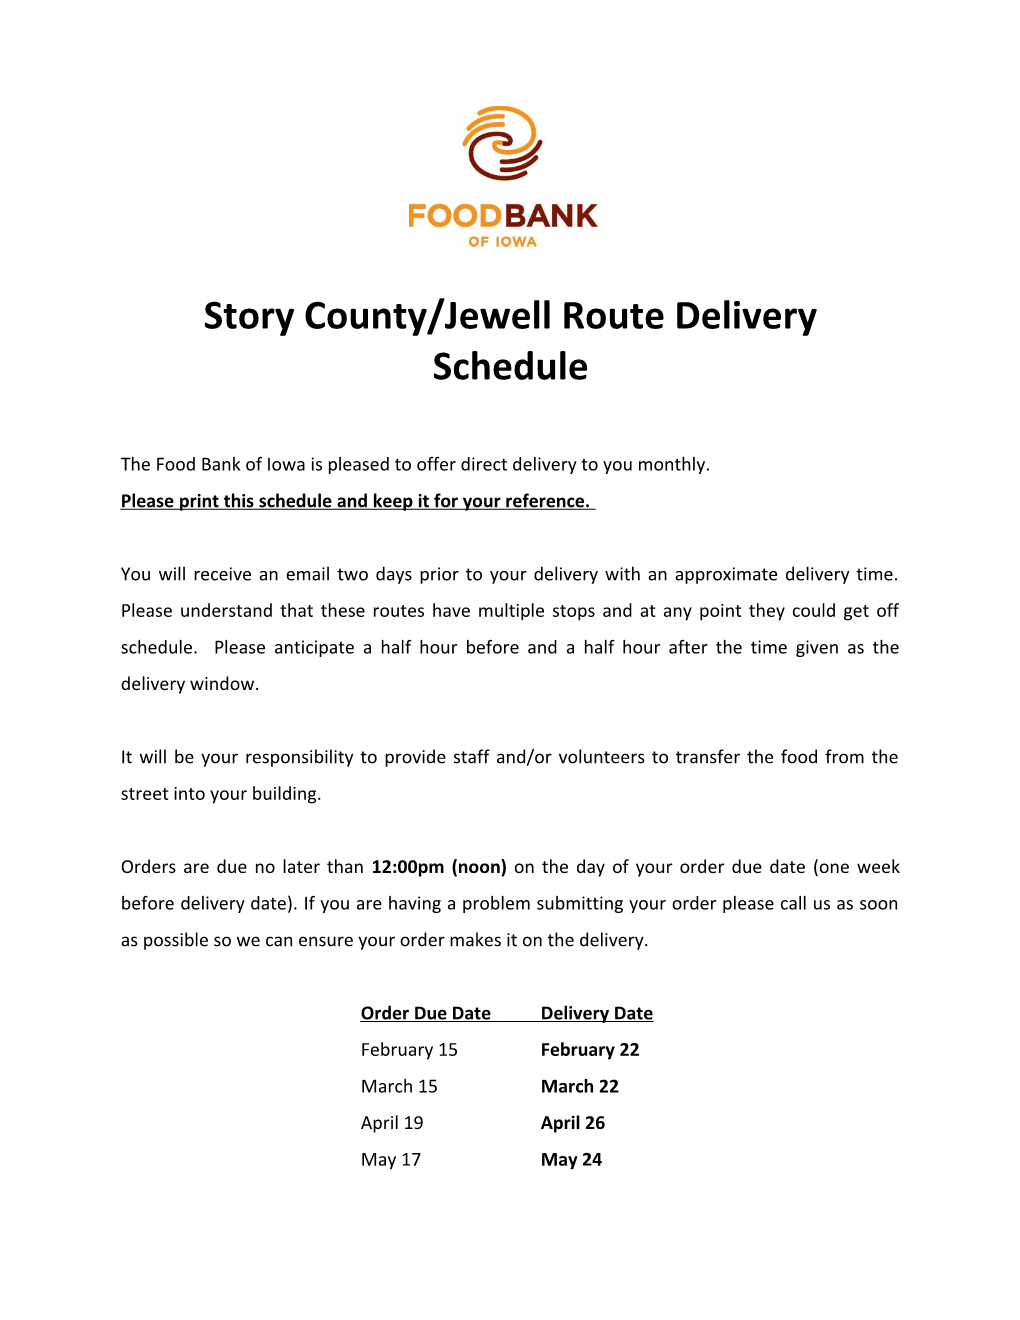 Story County/Jewell Route Delivery Schedule